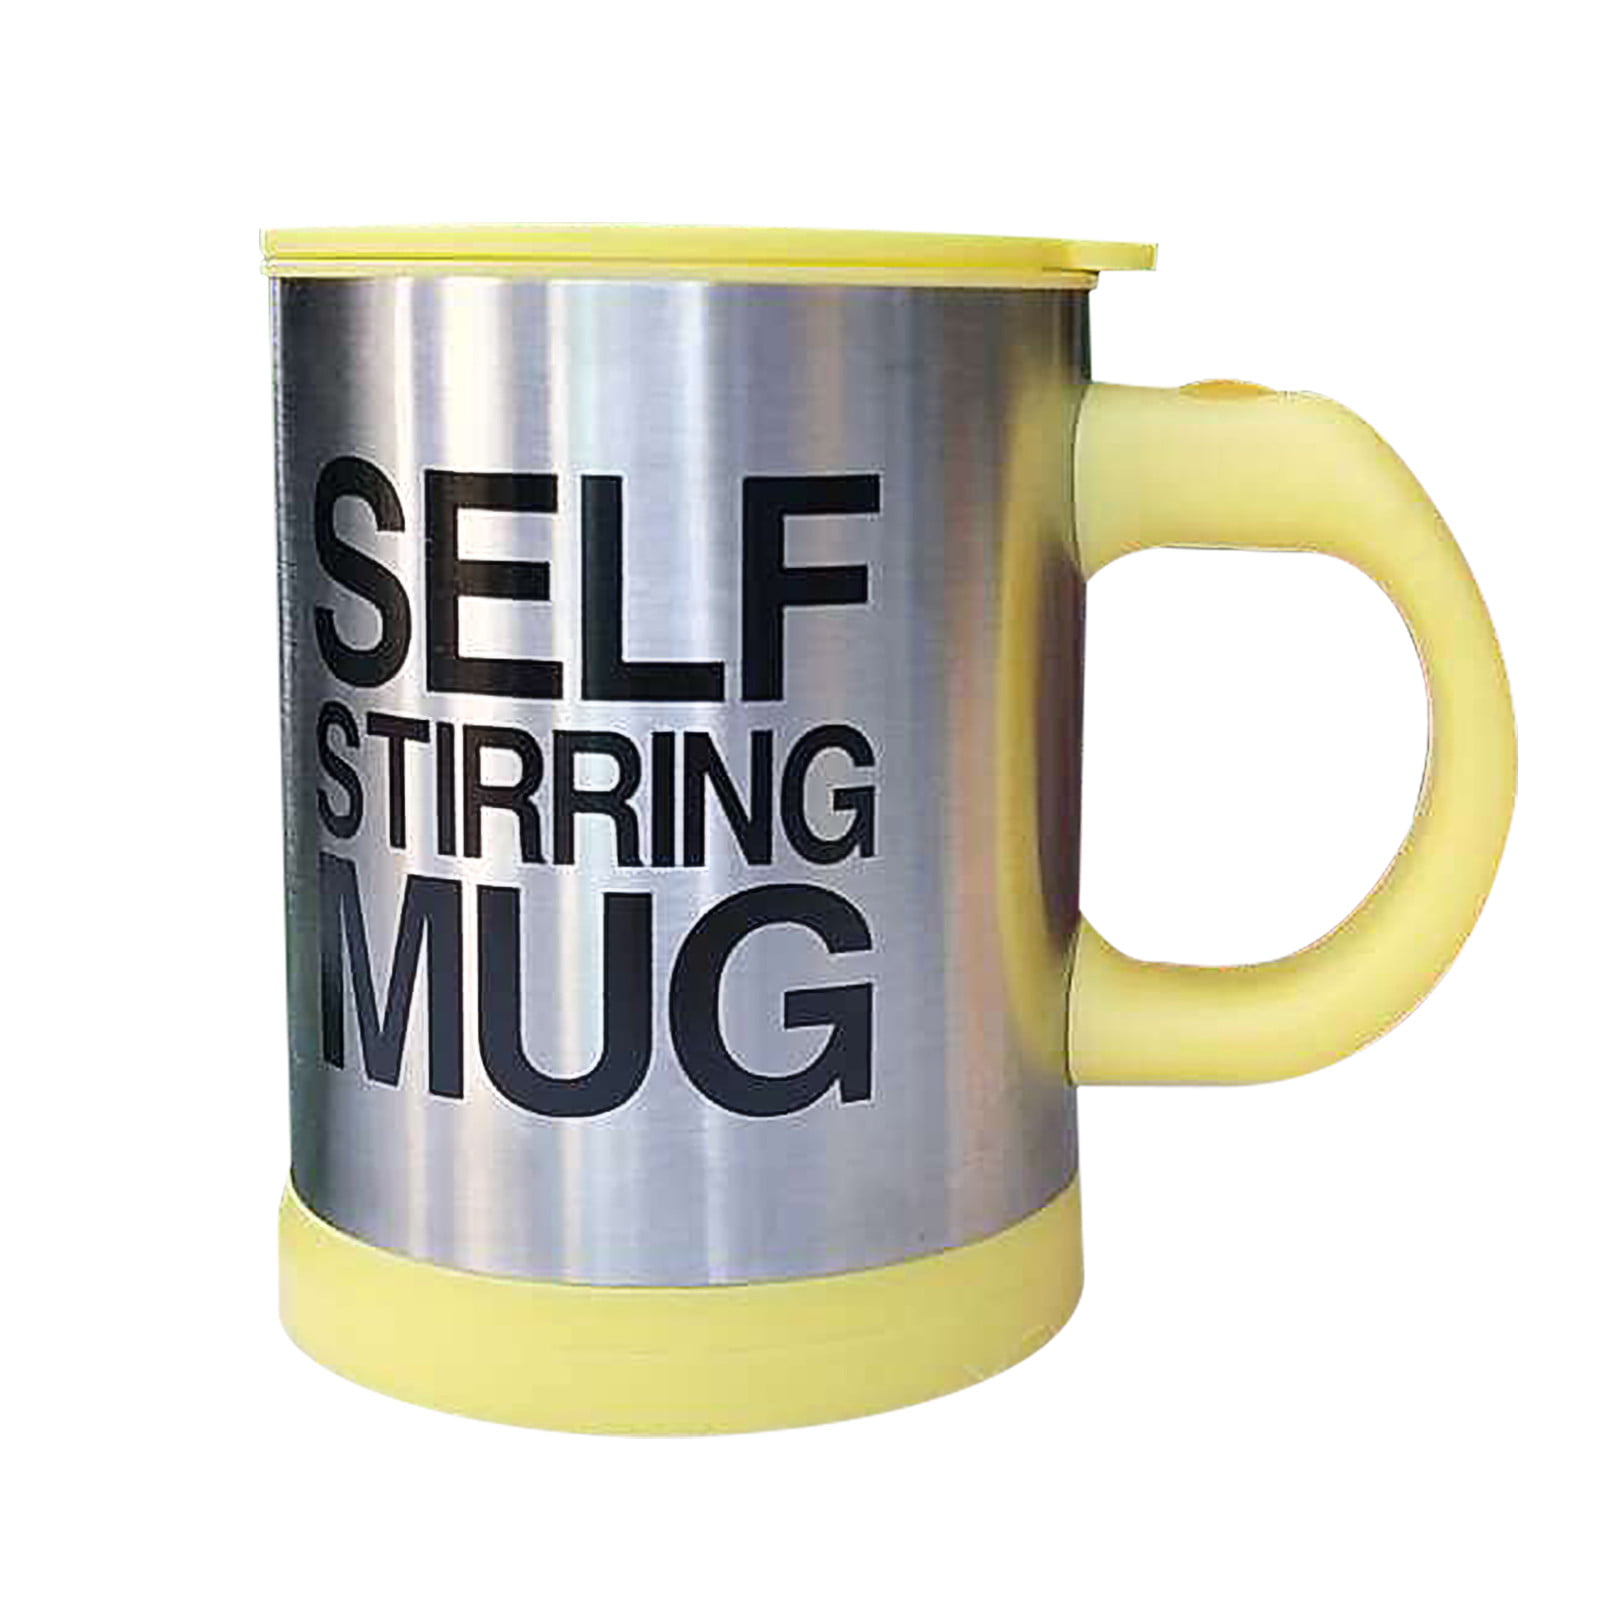 Self Stirring Mug Stainless Steel Lazy Automatic Coffee Tea Milk Mixing Cup Gift 